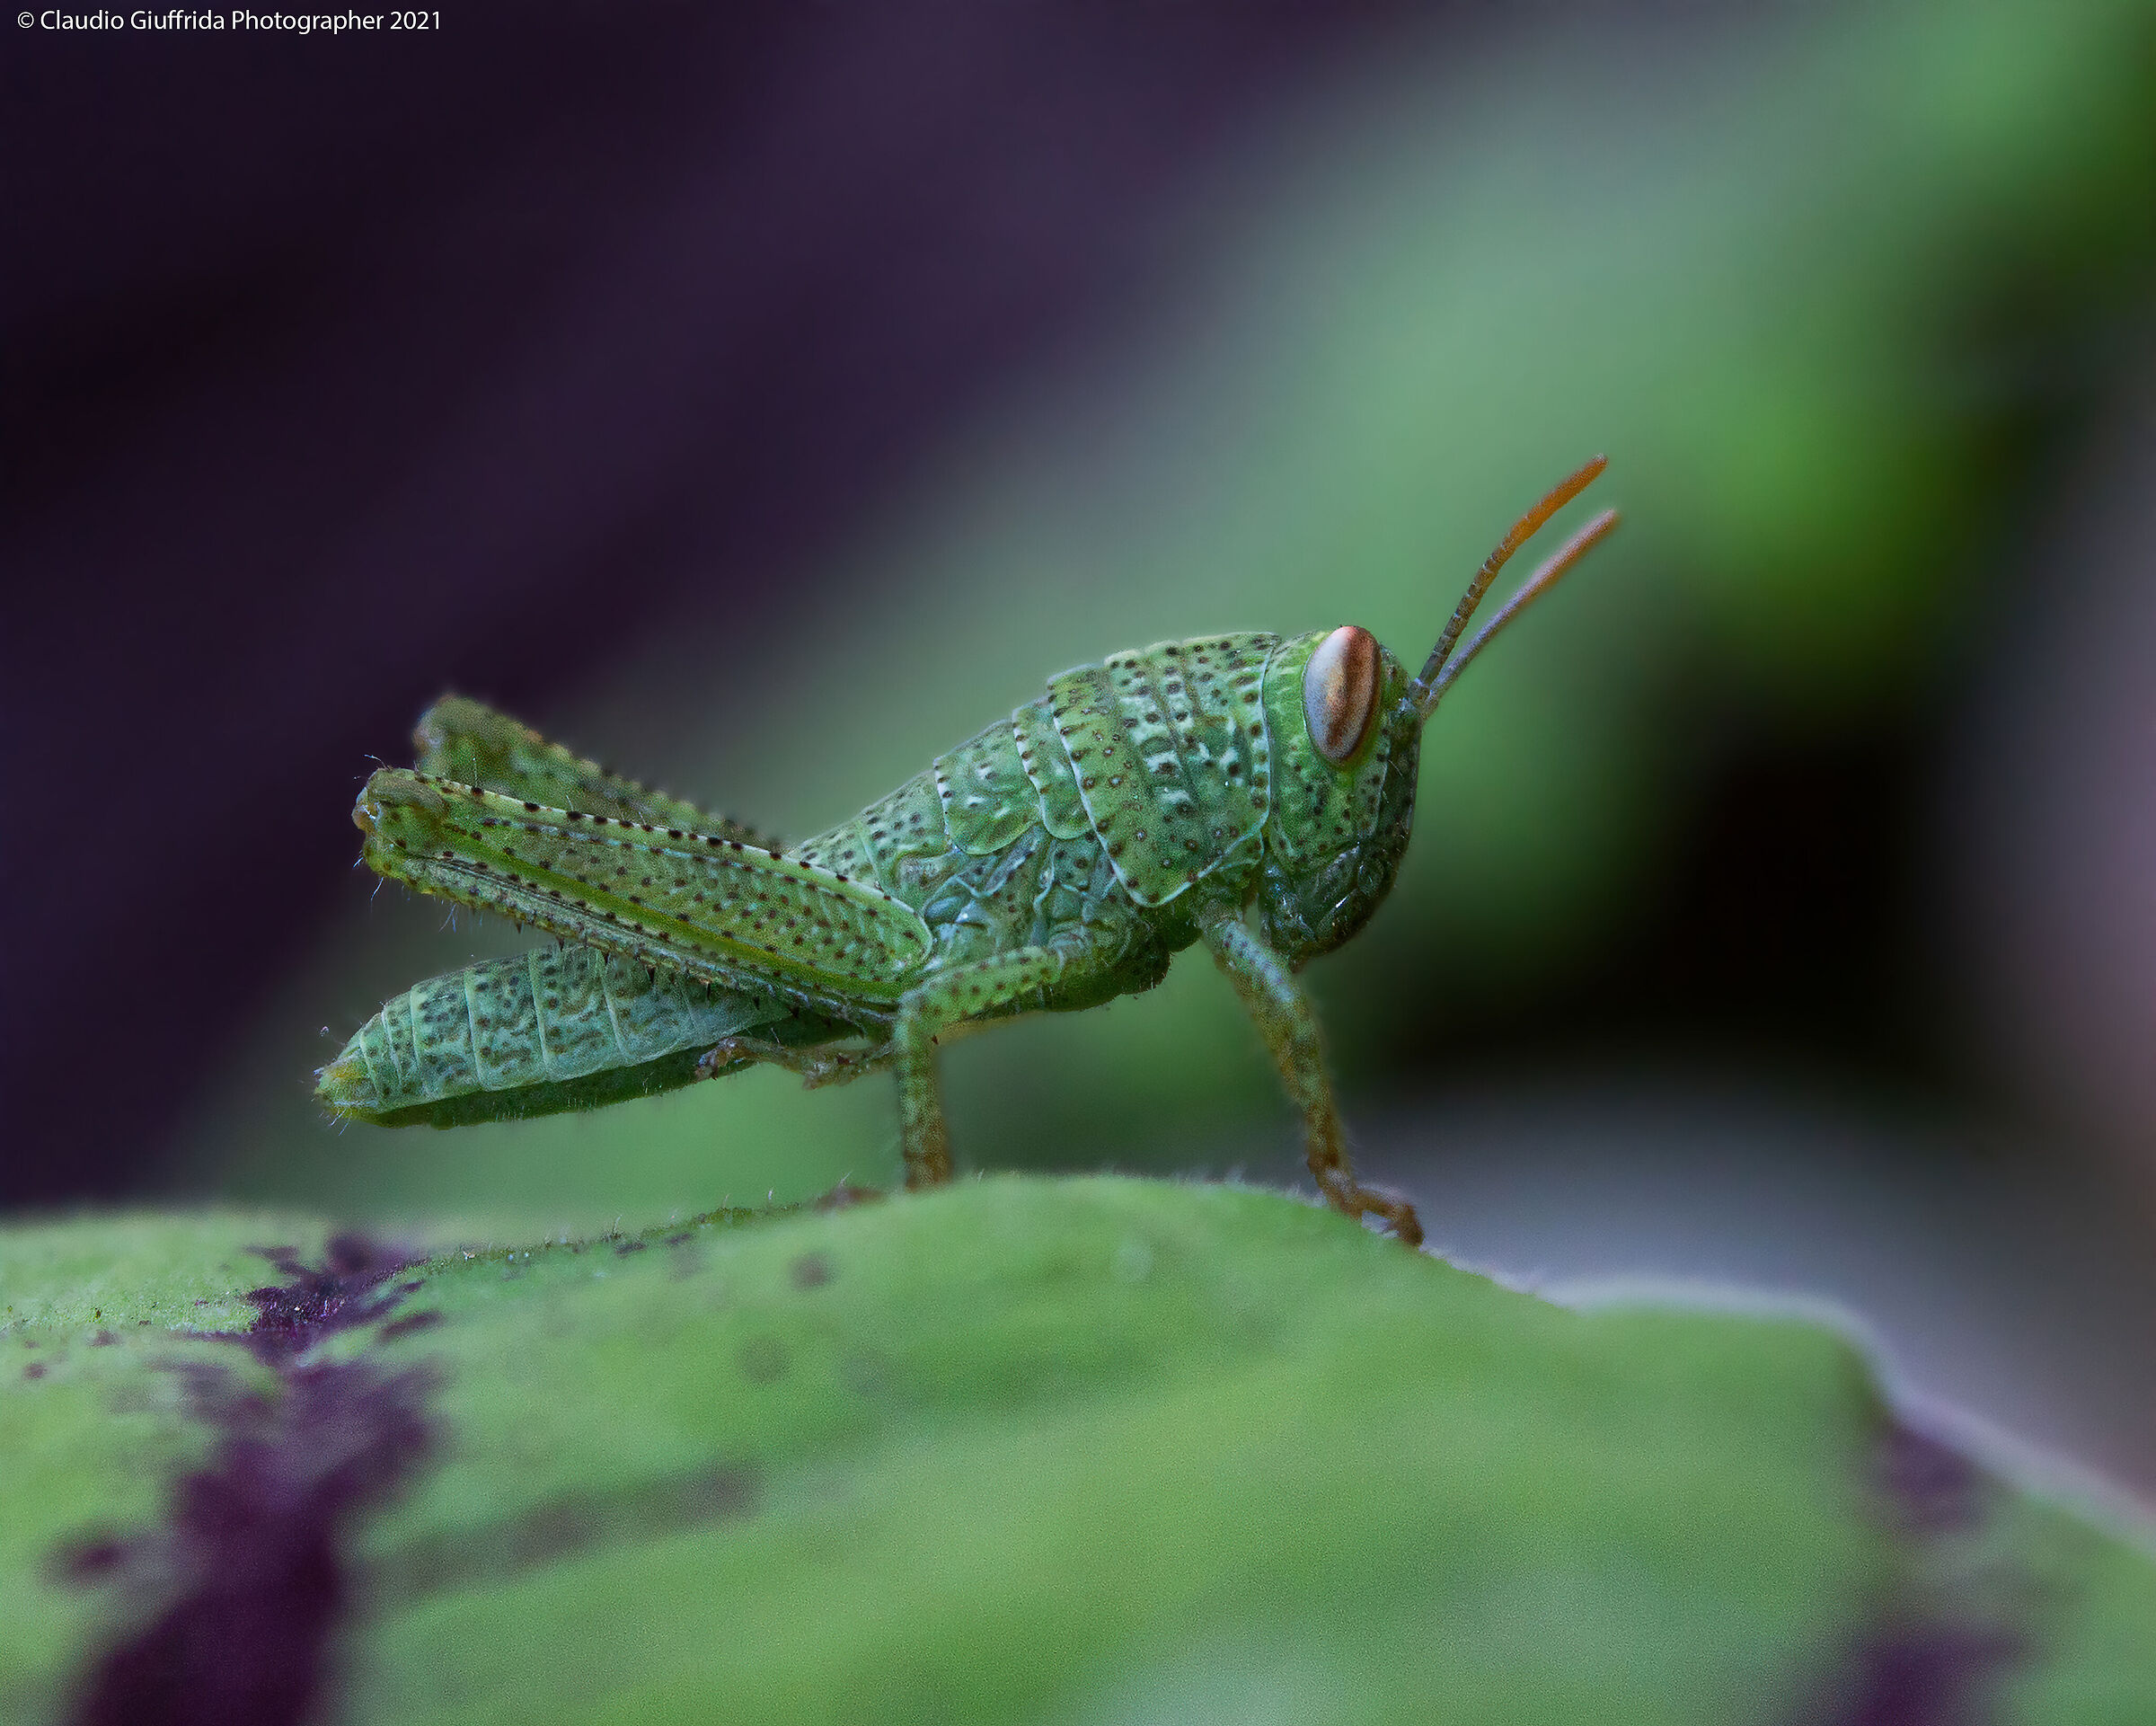 Small orthoptera...